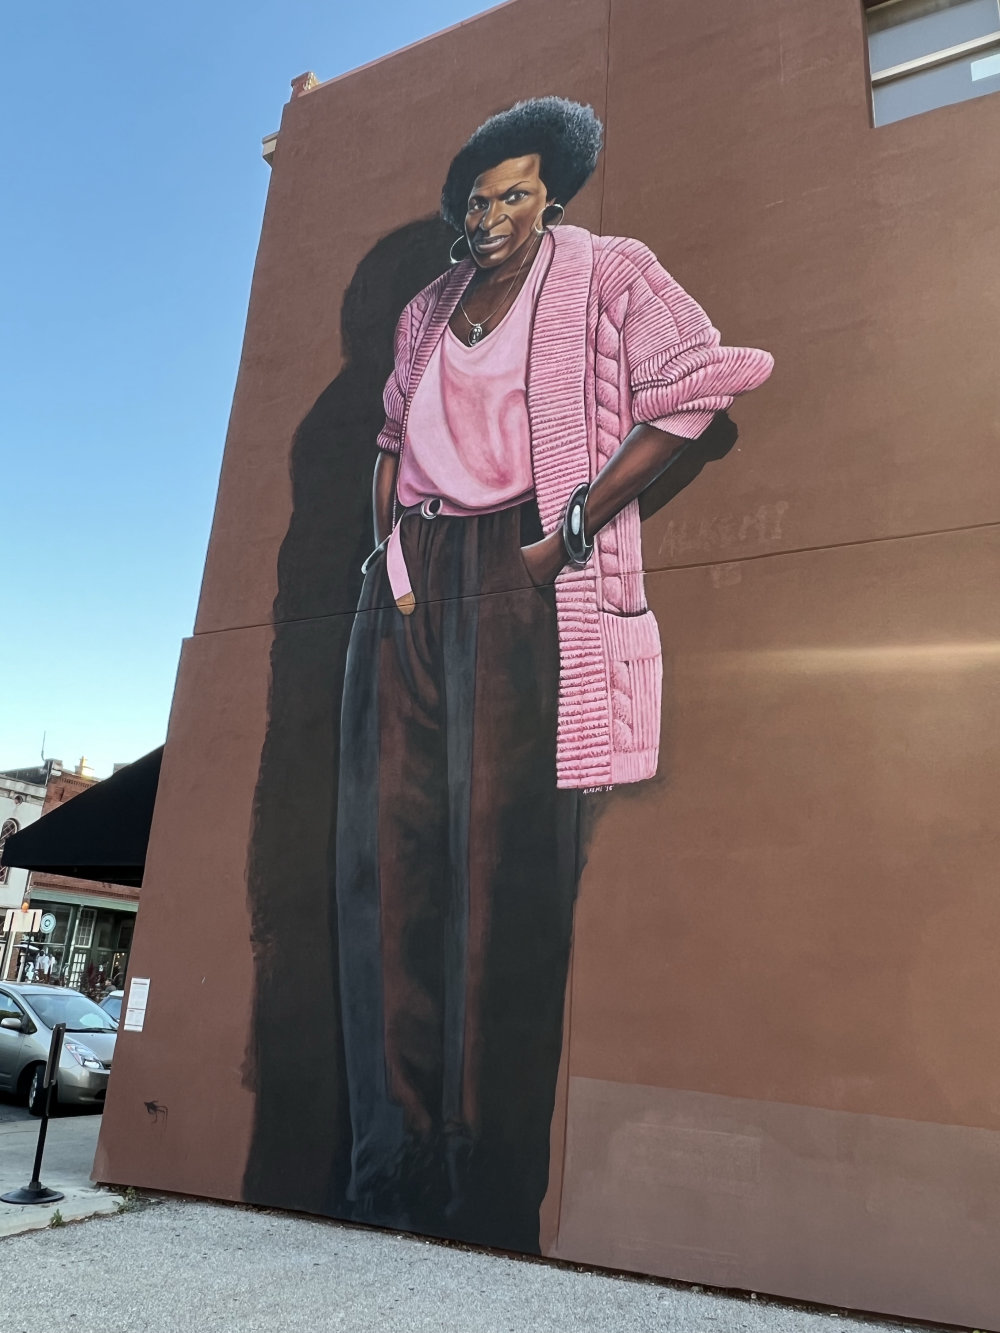 mural in Indianapolis by artist Alkemi.